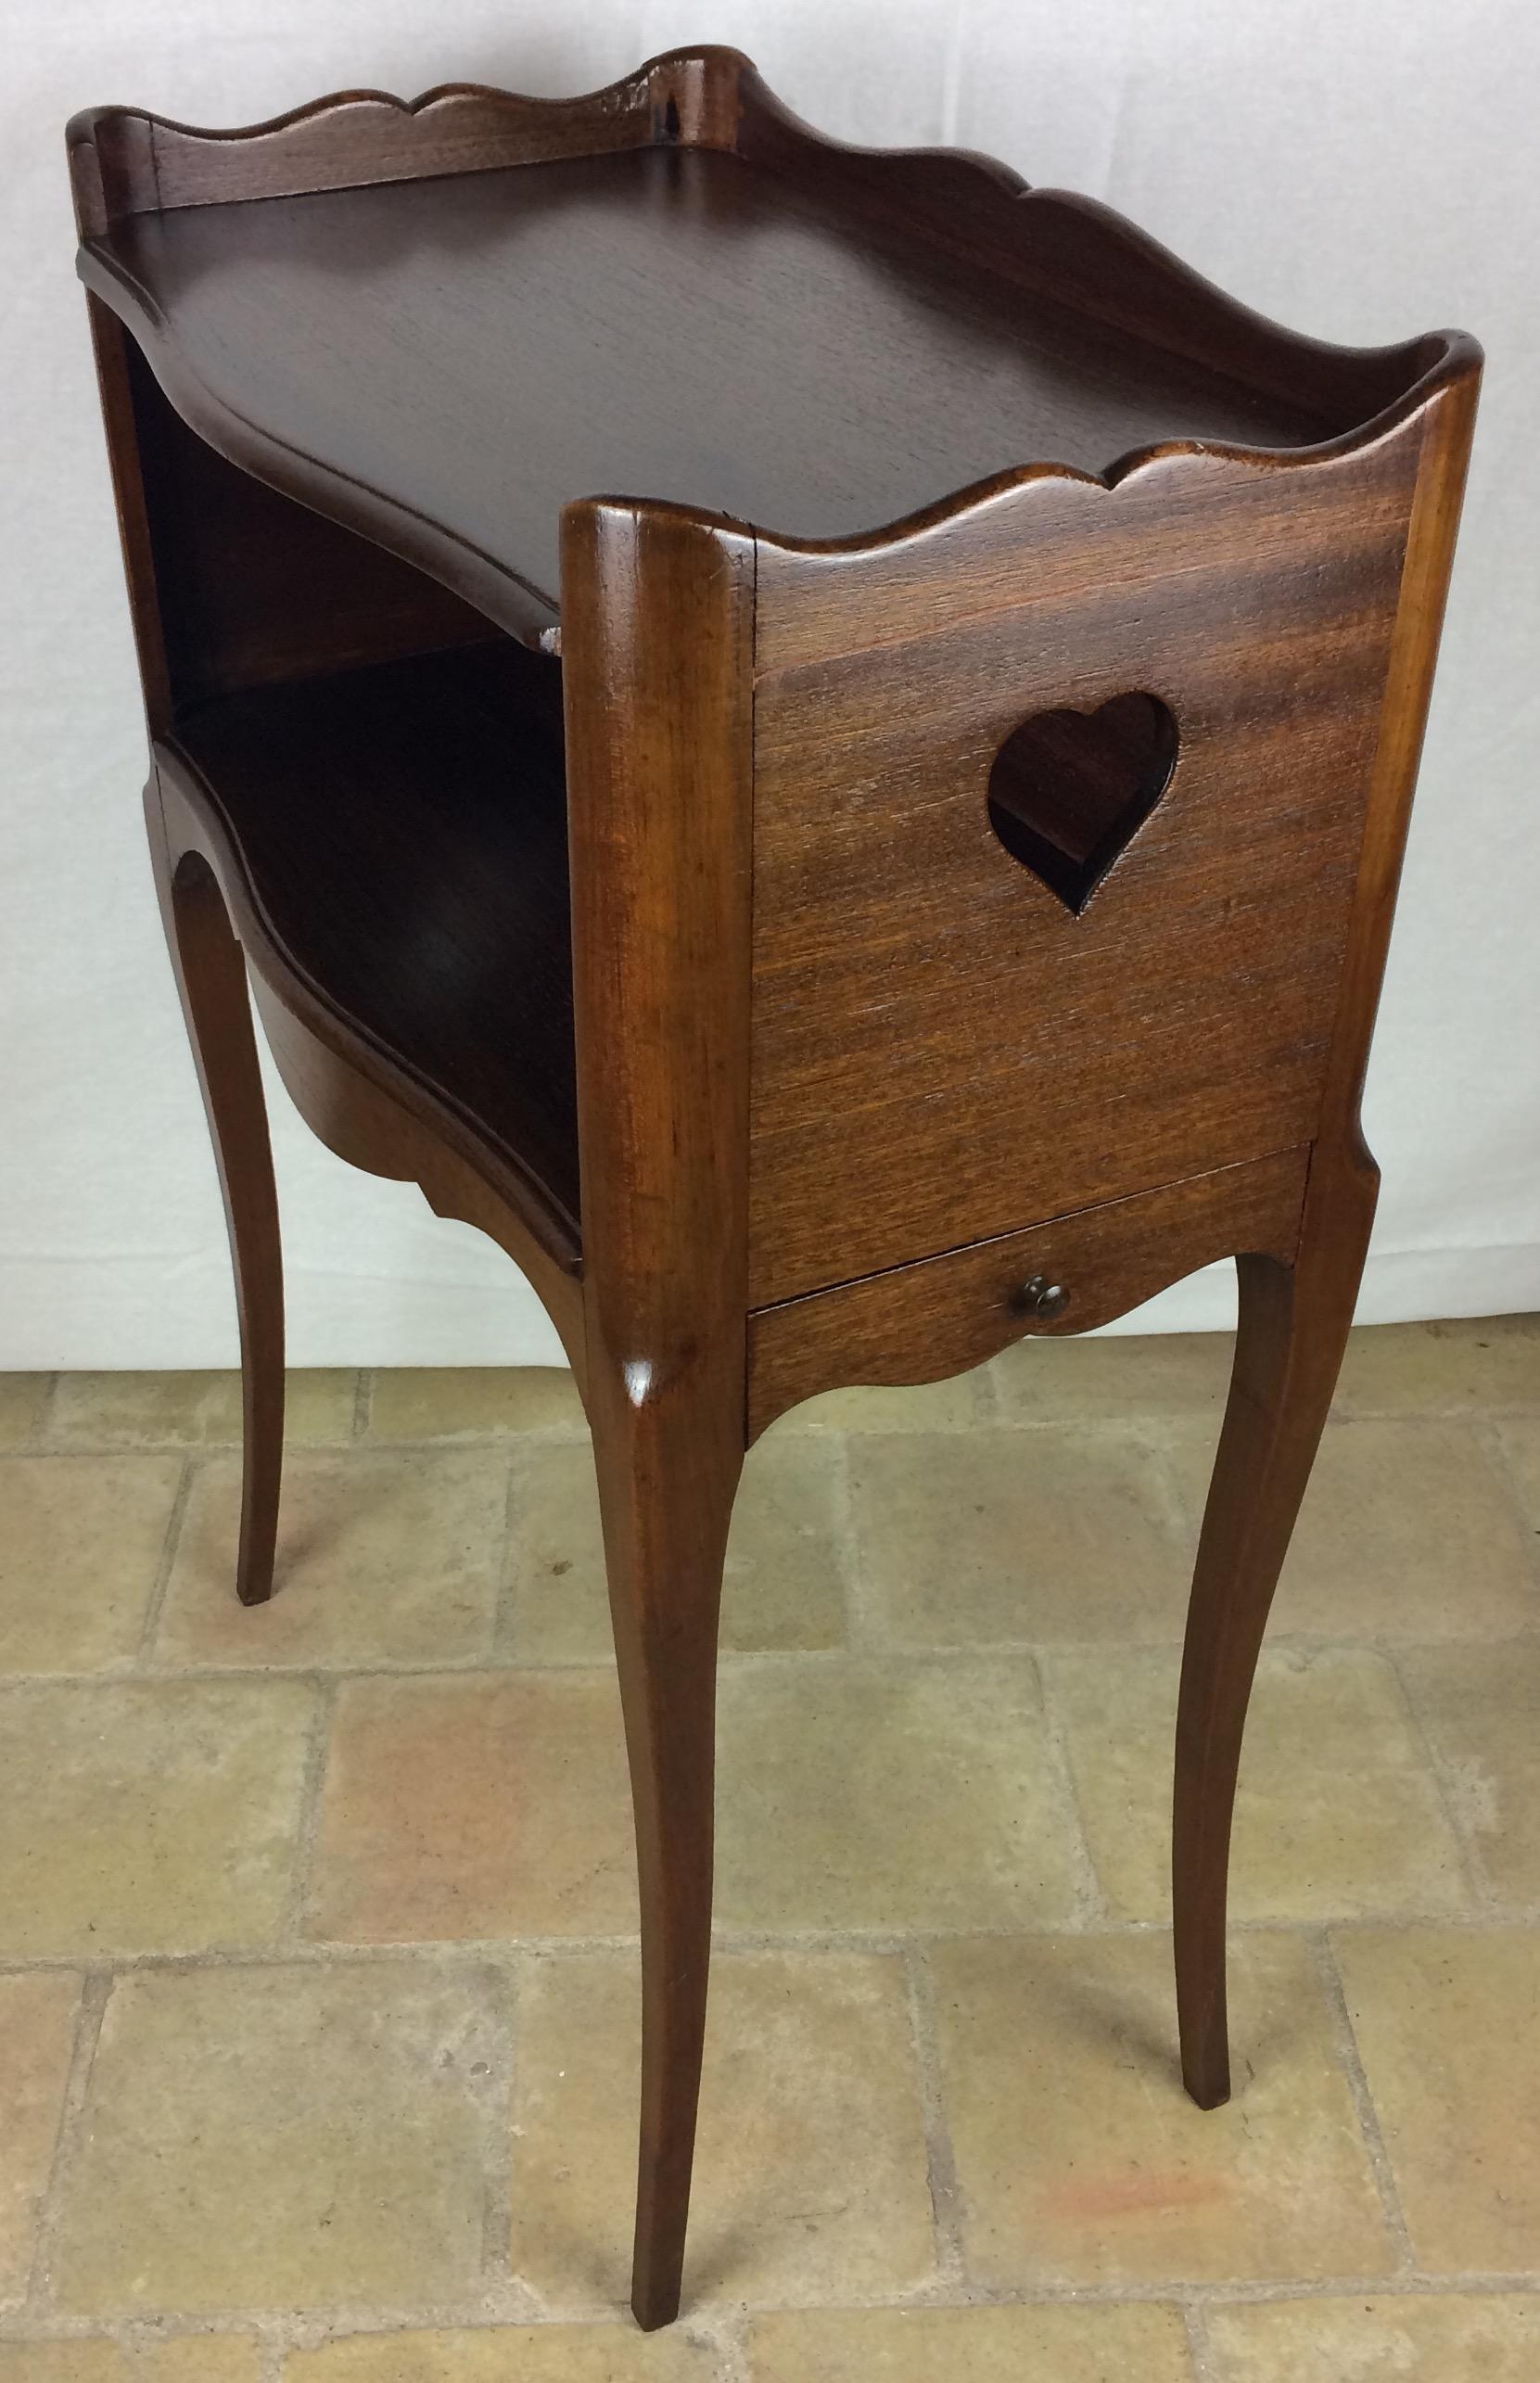 Hand-Crafted French Louis XV Style Mahogany Side Table or Nightstand